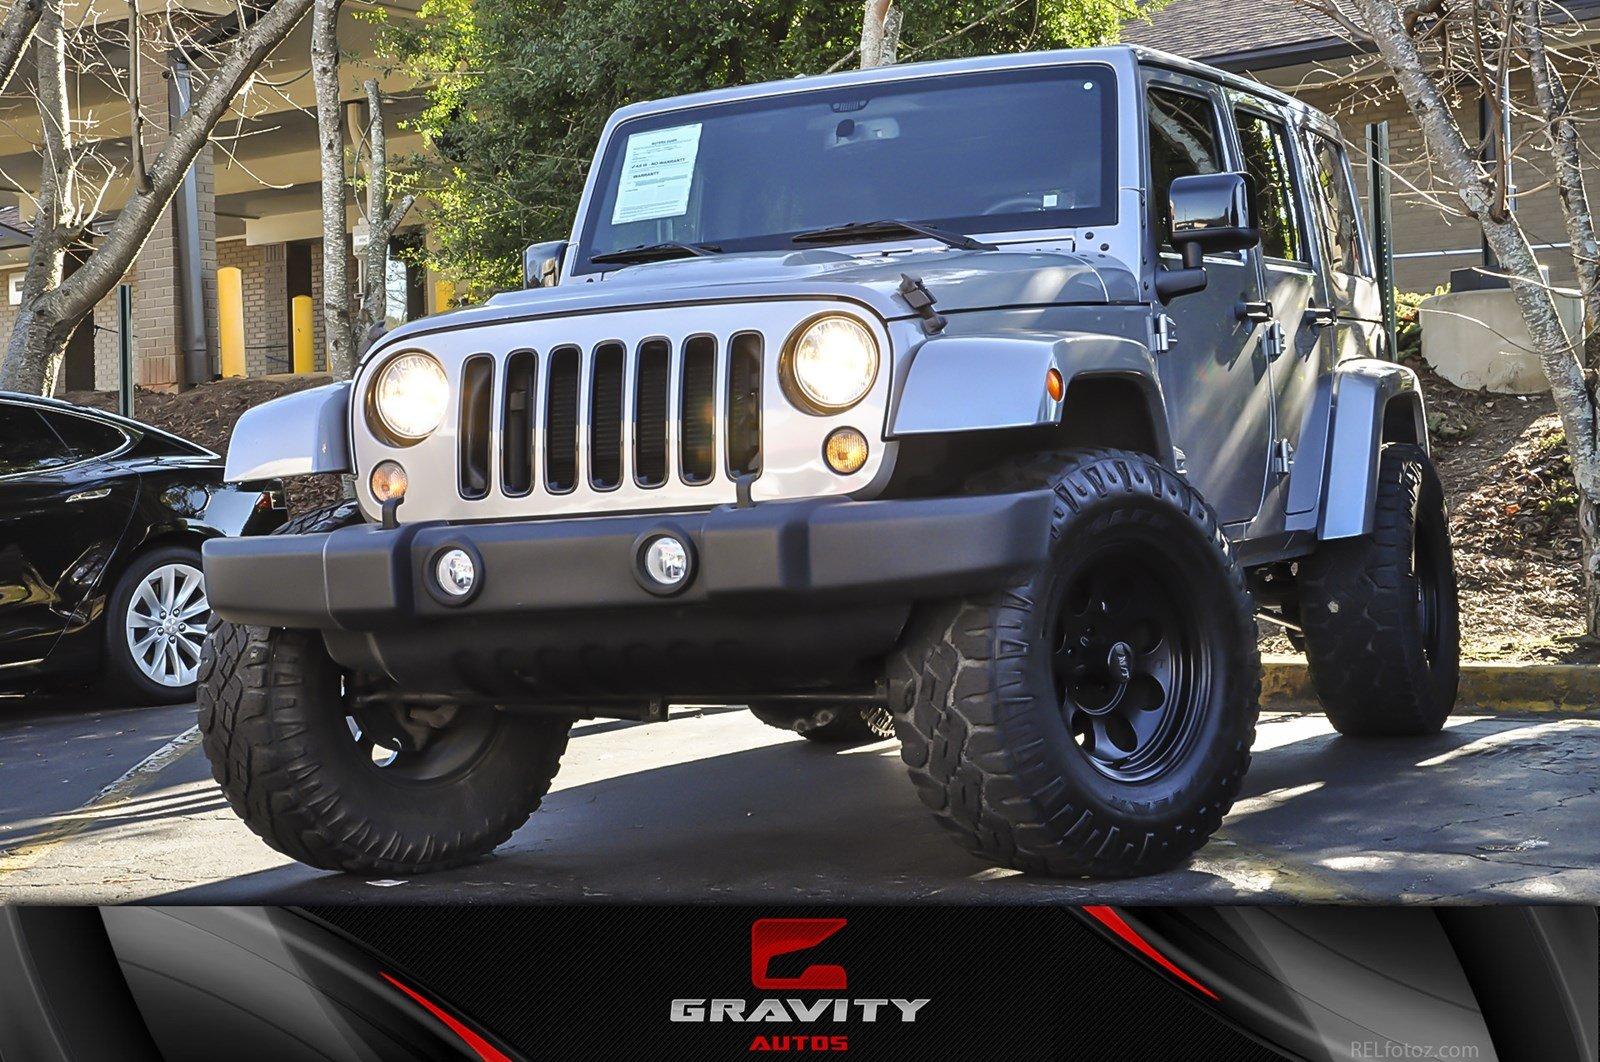 Used 2015 Jeep Wrangler Unlimited Wrangler Unlimited Altitude For Sale  (Sold) | Gravity Autos Atlanta Stock #718336